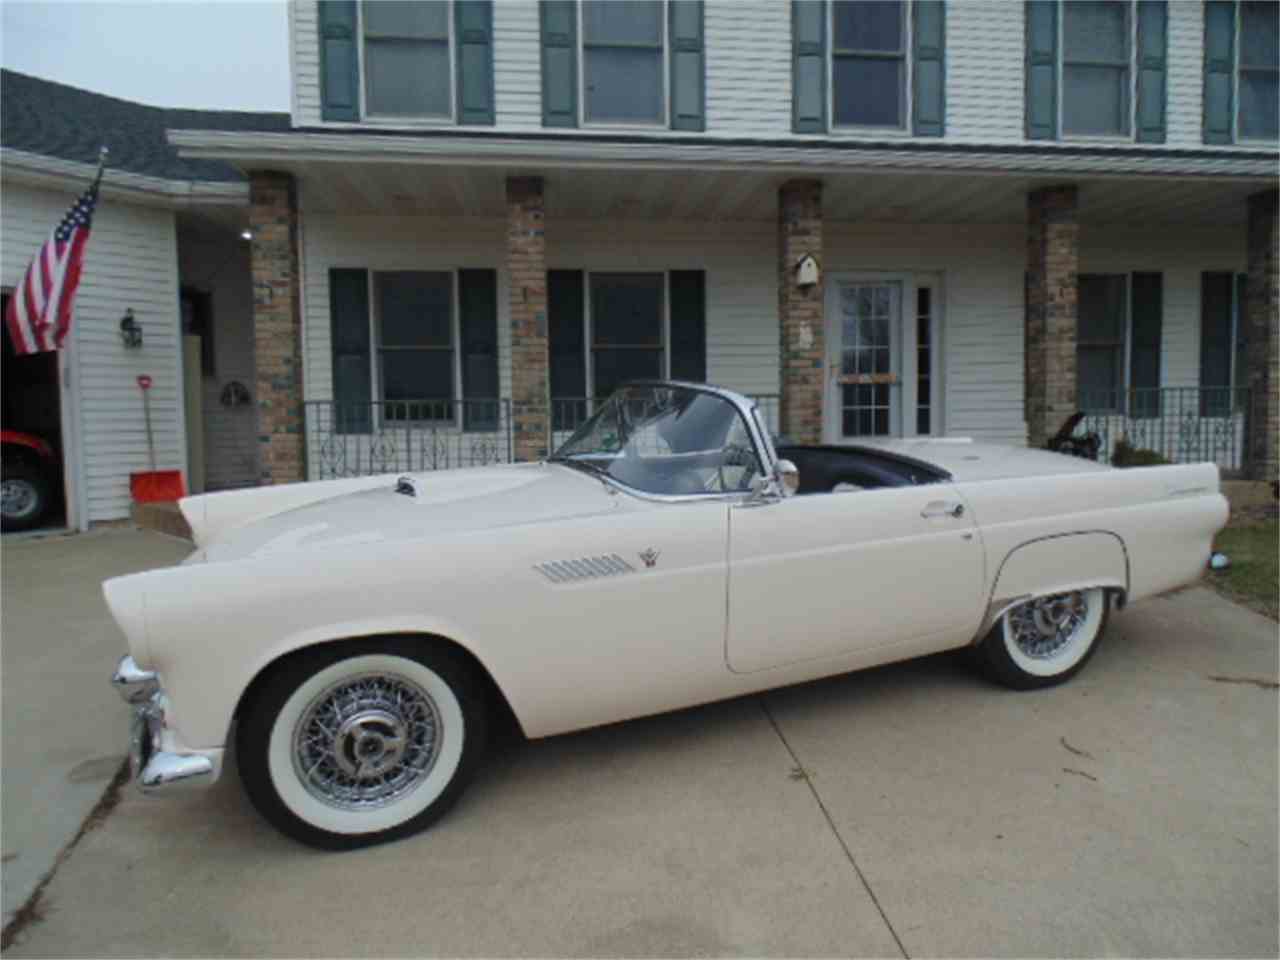 1955 Thunderbird Hardtopconvertible For Sale Classiccars for Classic Cars Rochester Mn